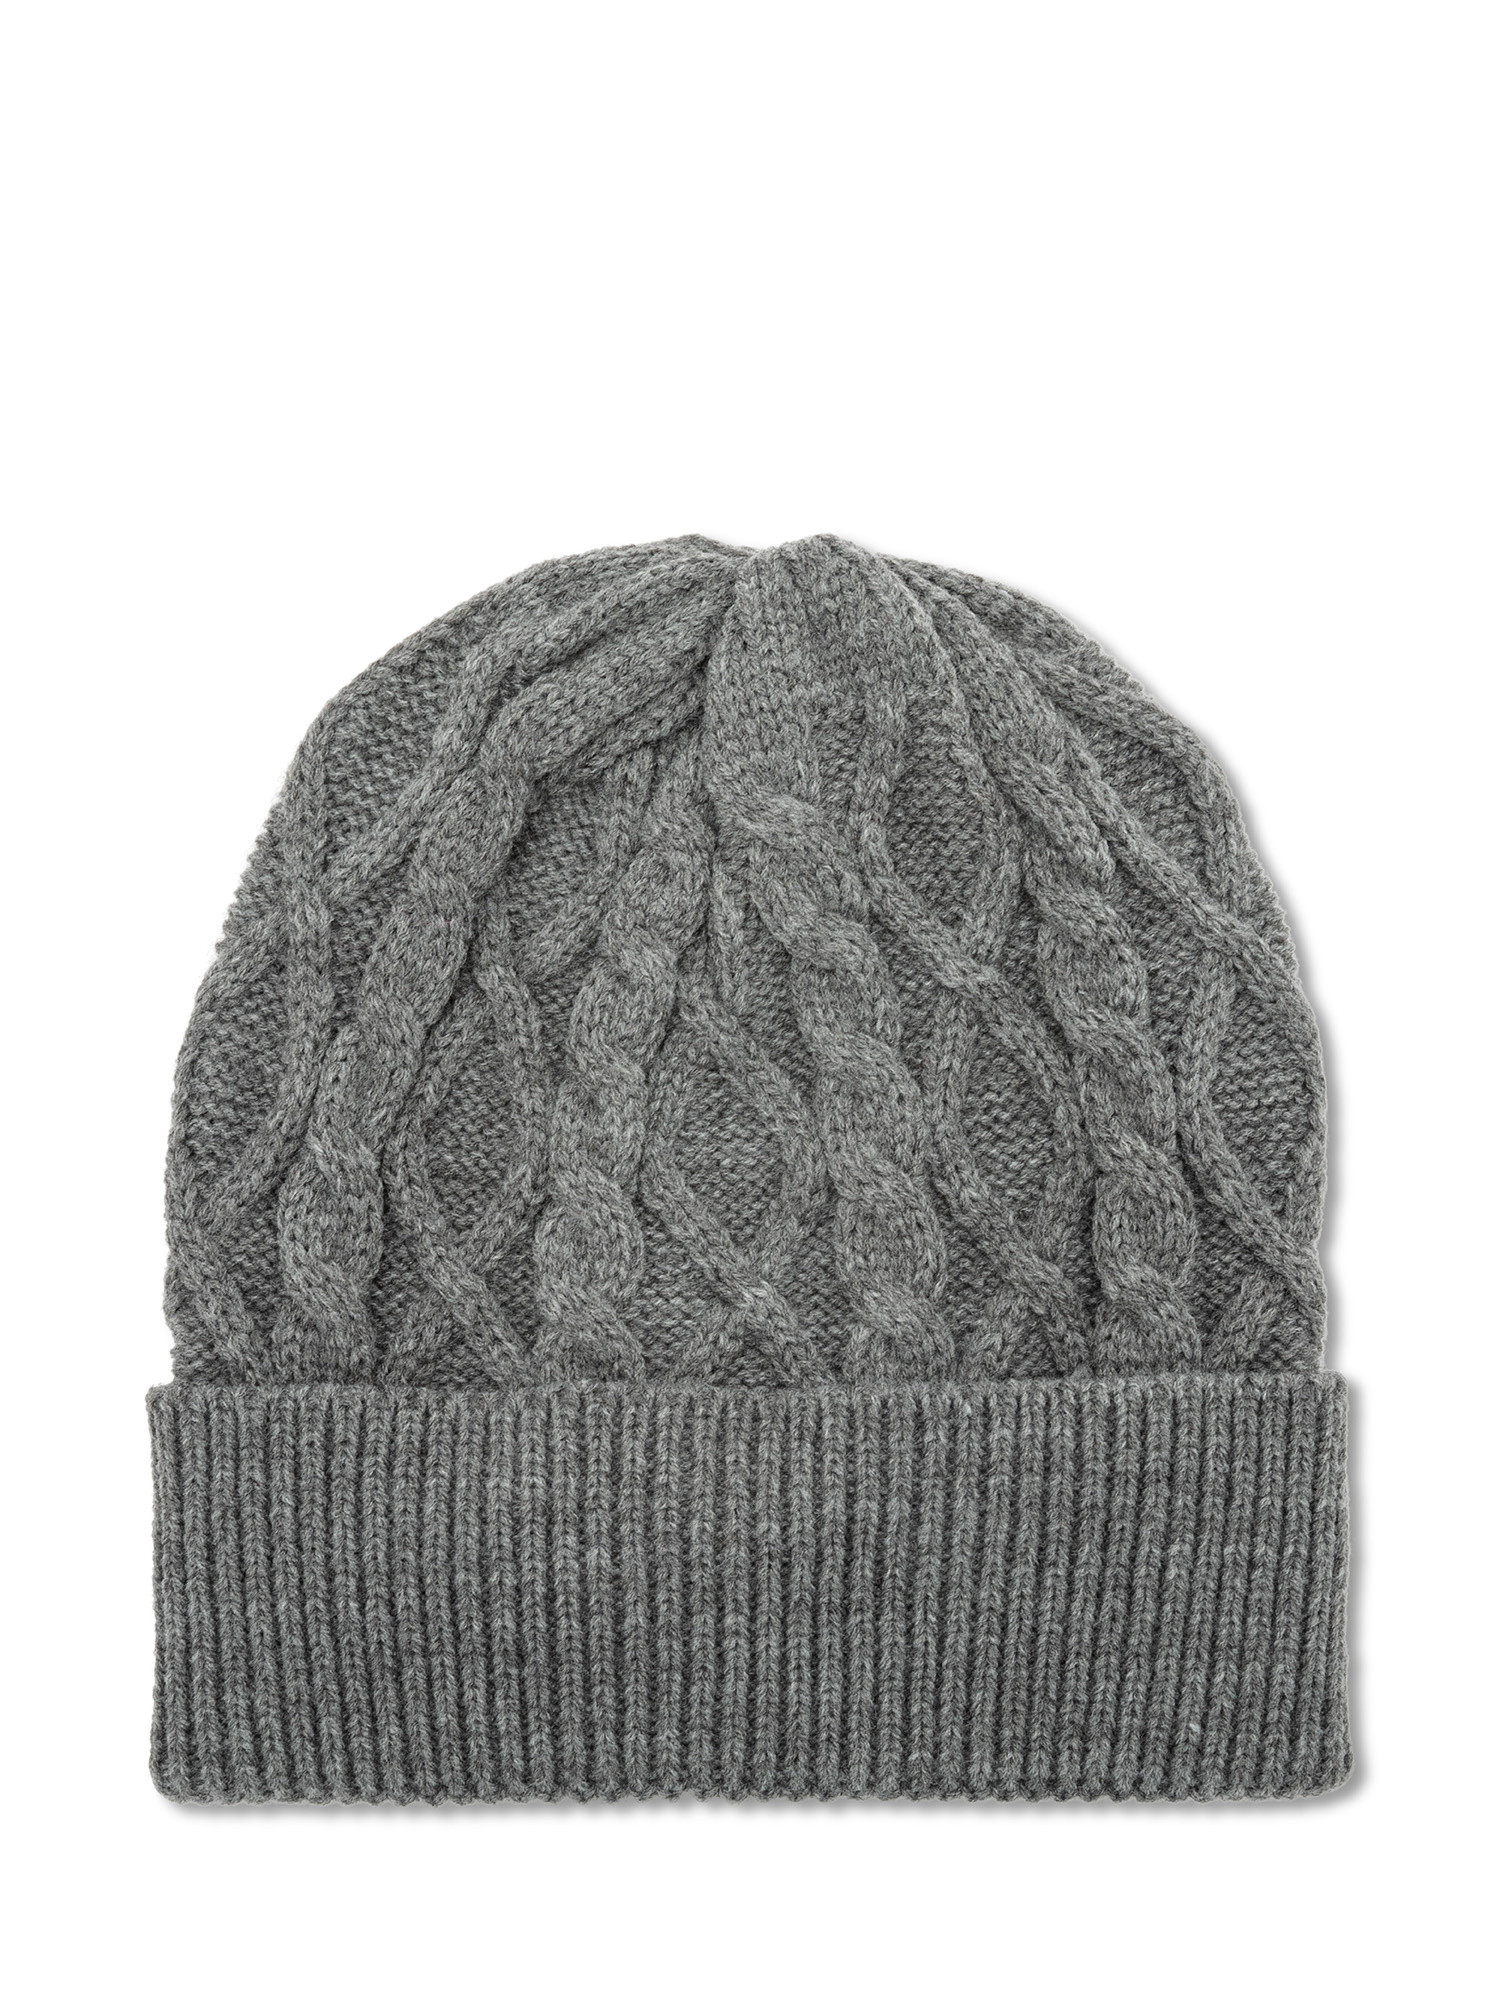 Luca D'Altieri - Beanie with knitted pattern, Grey, large image number 0